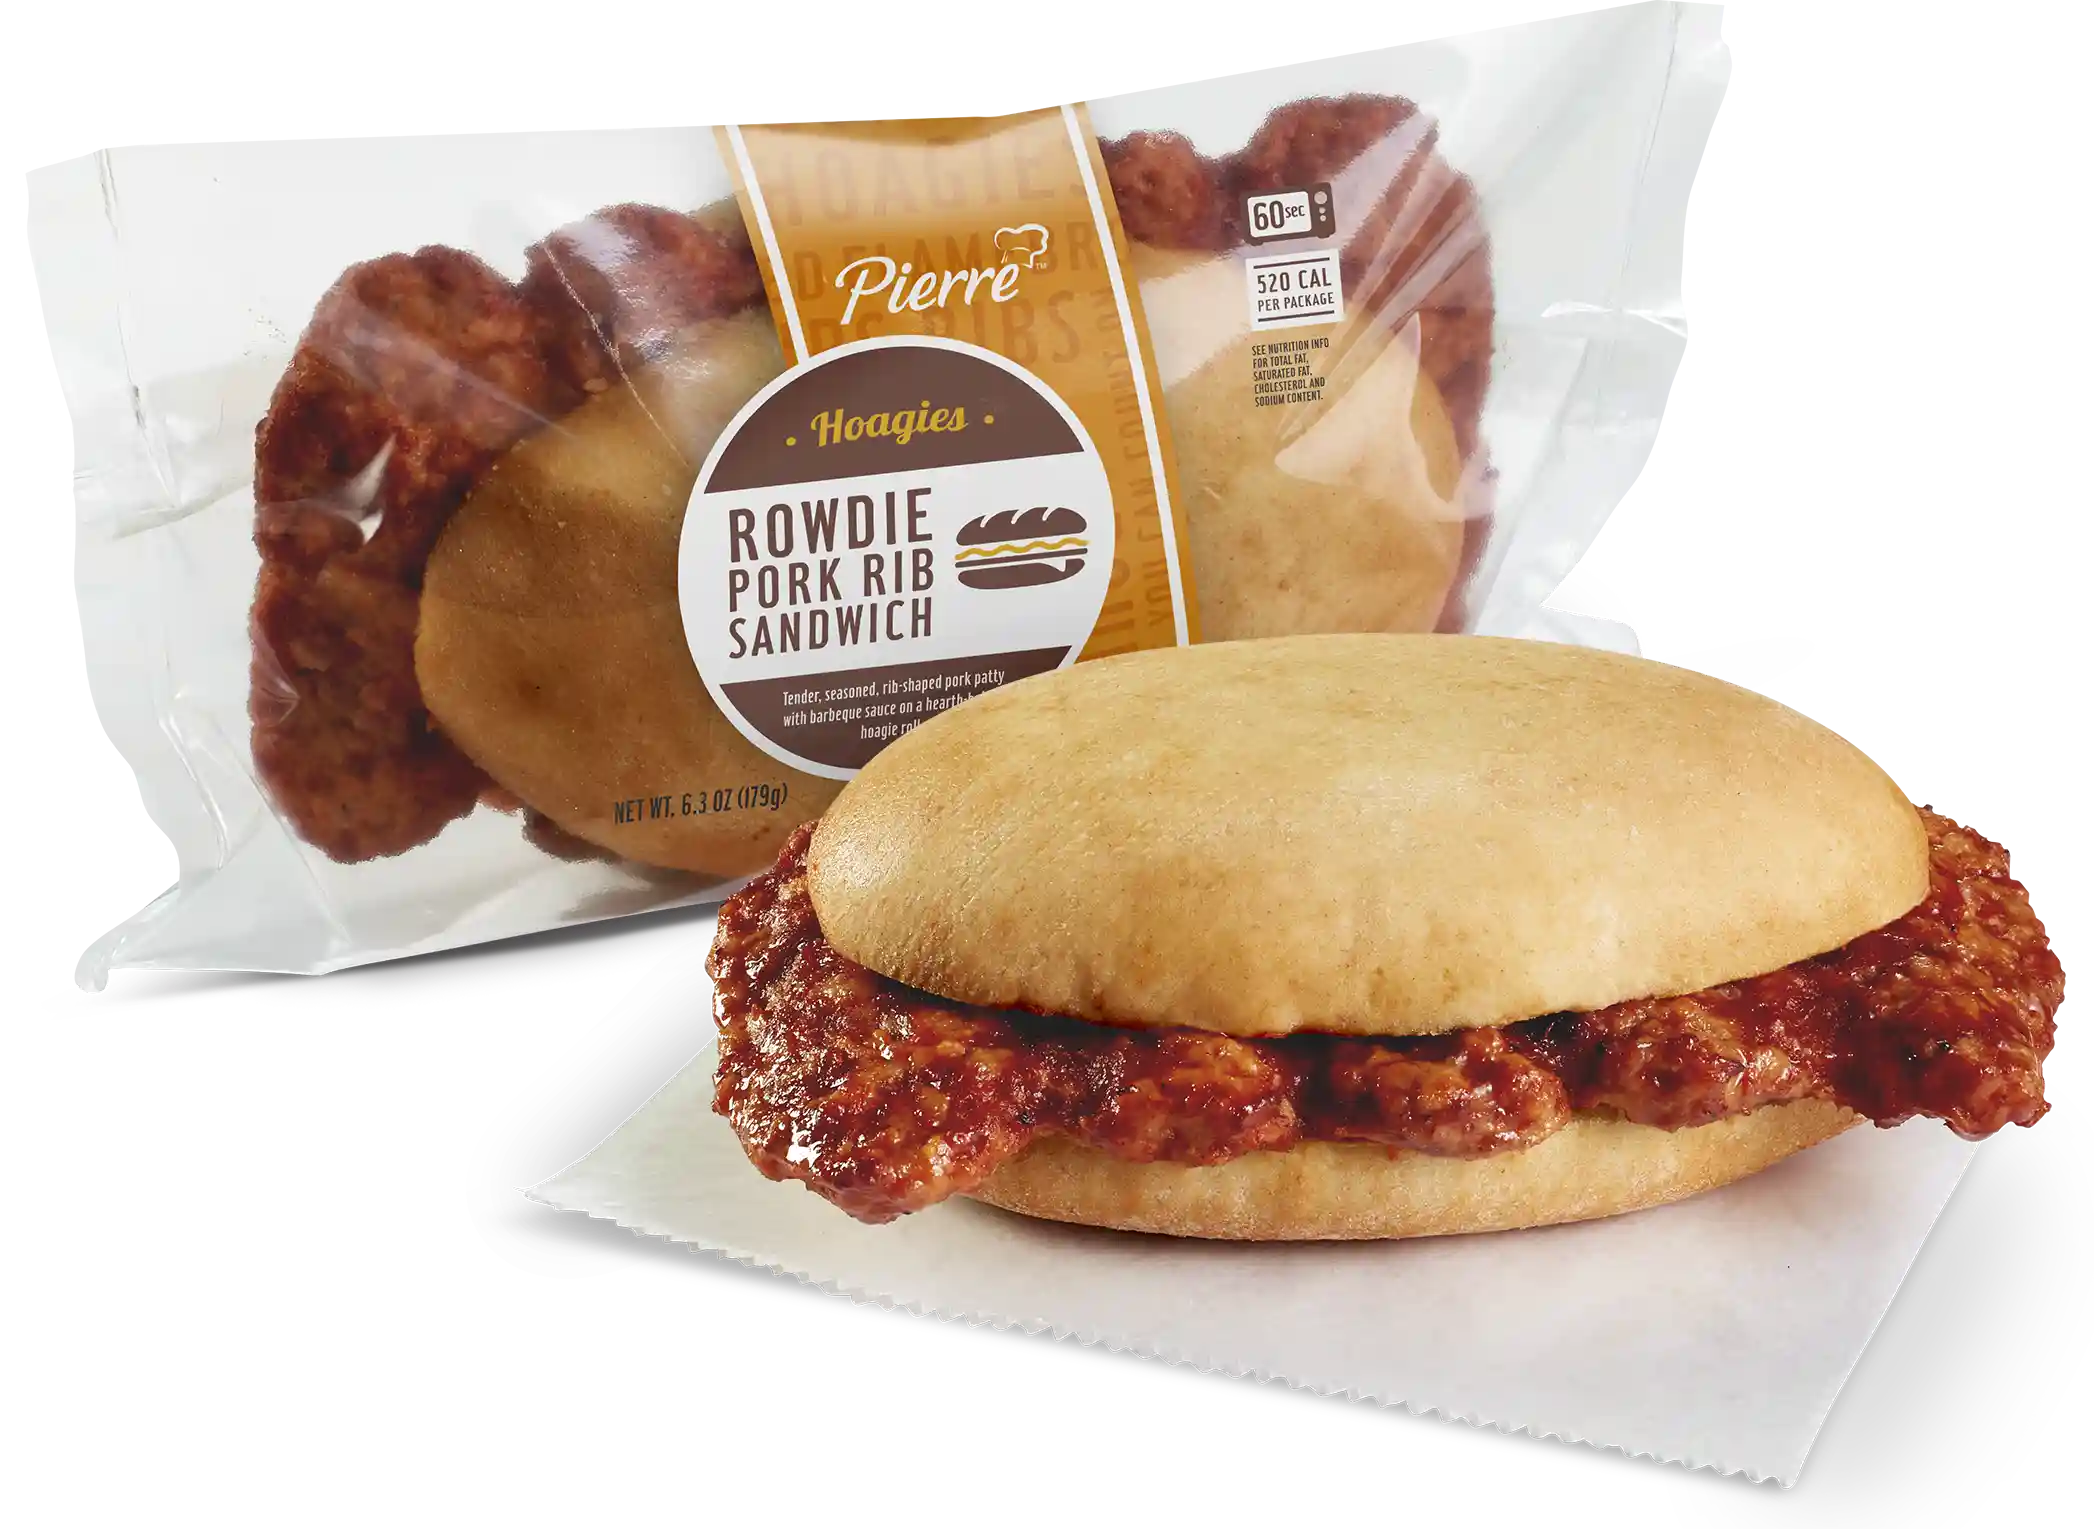 Pierre® Rowdie Rib™ Sweet And Tangy Barbecue Pork Rib Sandwichhttps://images.salsify.com/image/upload/s--sffrLrkV--/q_25/rgvghwfiixp5spxgvtdq.webp